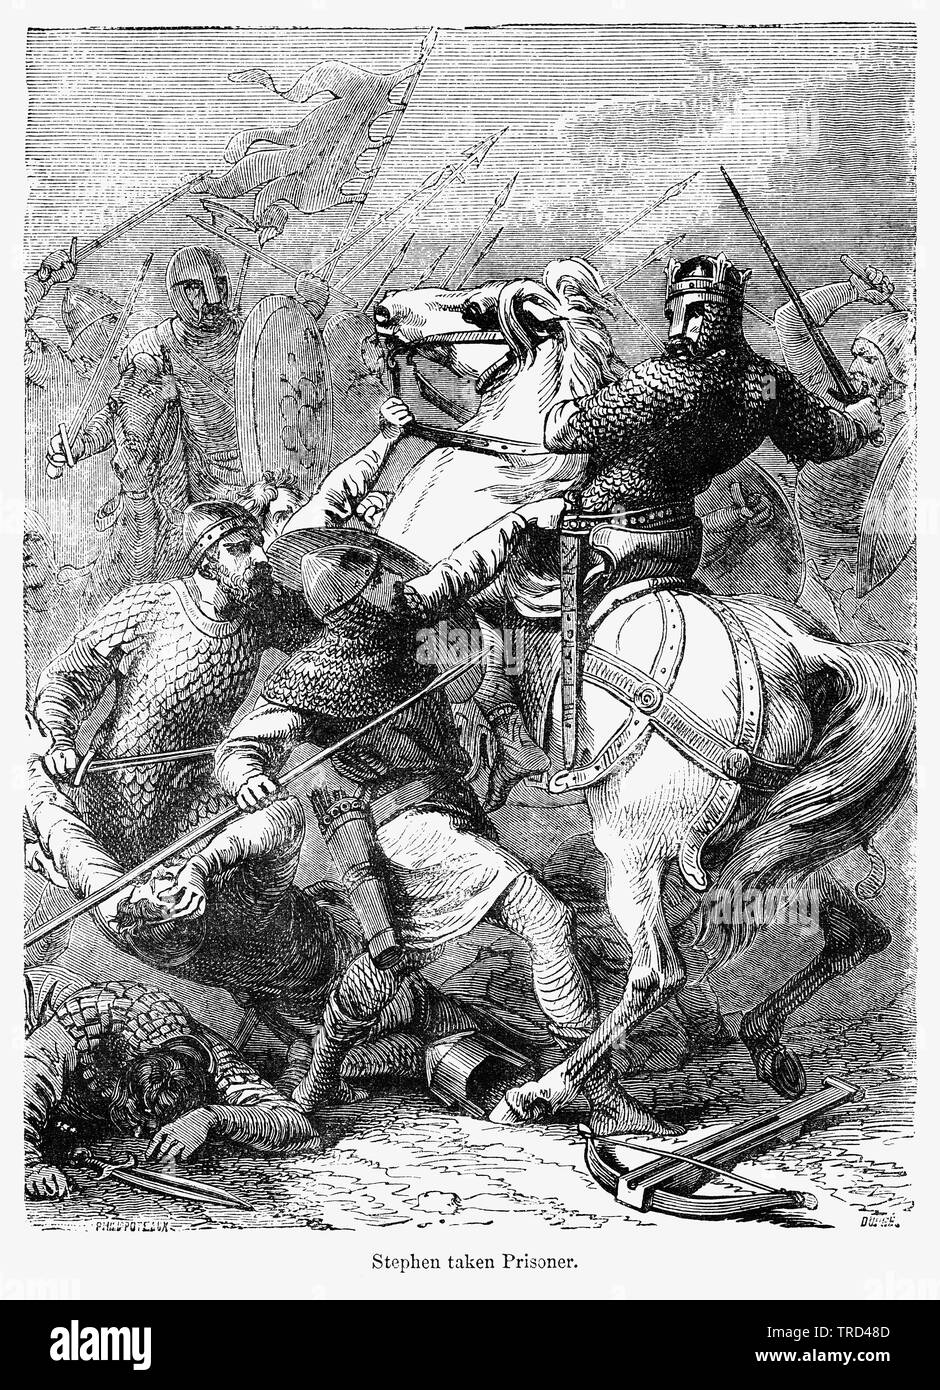 Stephen taken Prisoner, King Stephen I of England taken Prisoner by Robert of Gloucester, Illustration from John Cassell's Illustrated History of England, Vol. I from the earliest period to the reign of Edward the Fourth, Cassell, Petter and Galpin, 1857 Stock Photo